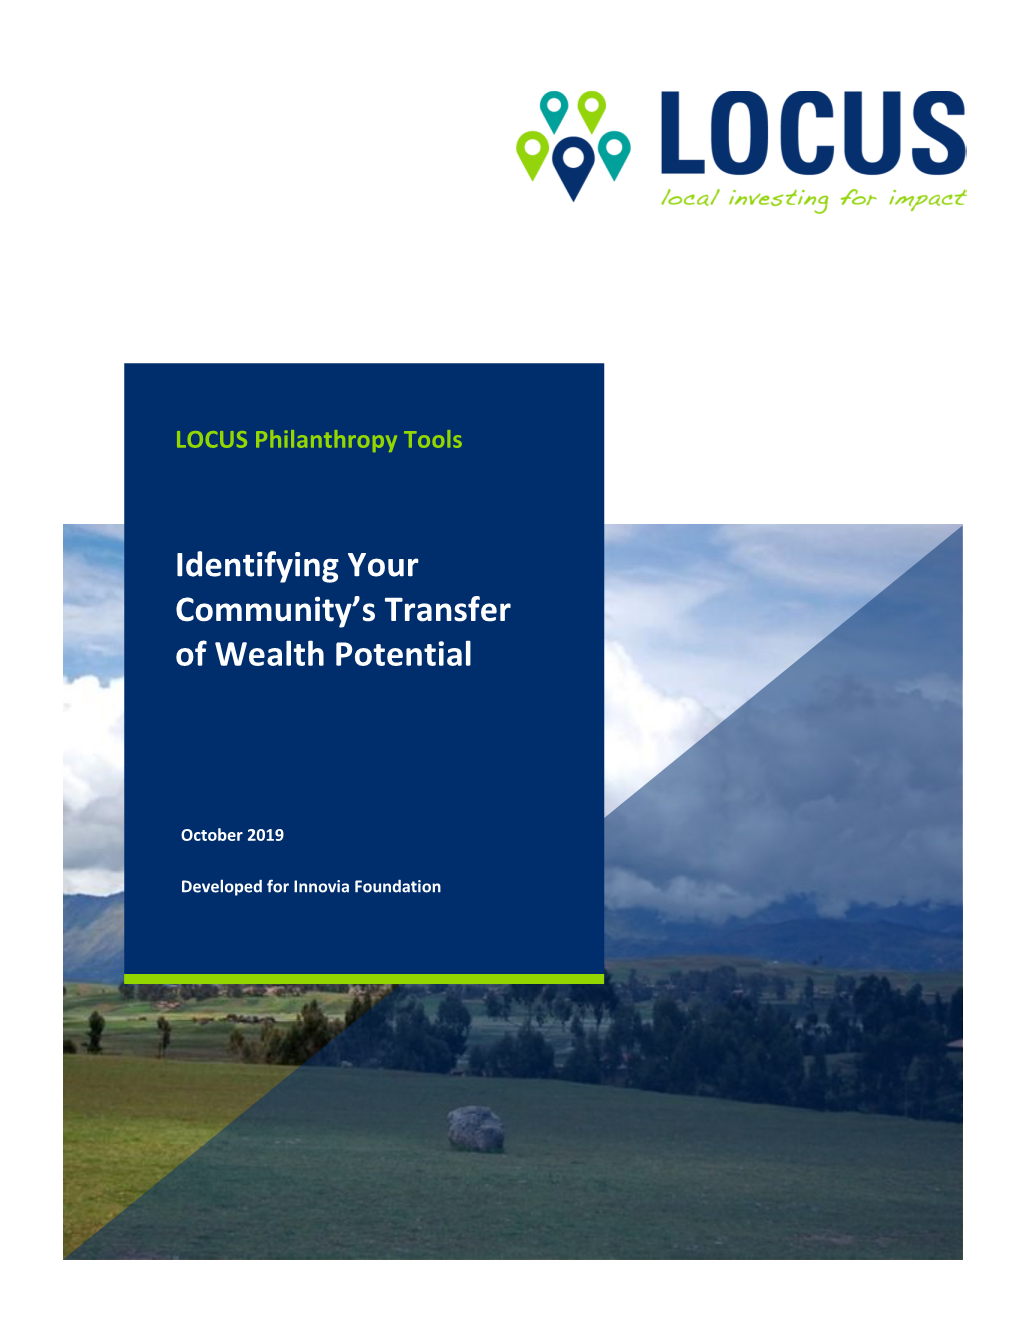 Identifying Your Community's Transfer of Wealth